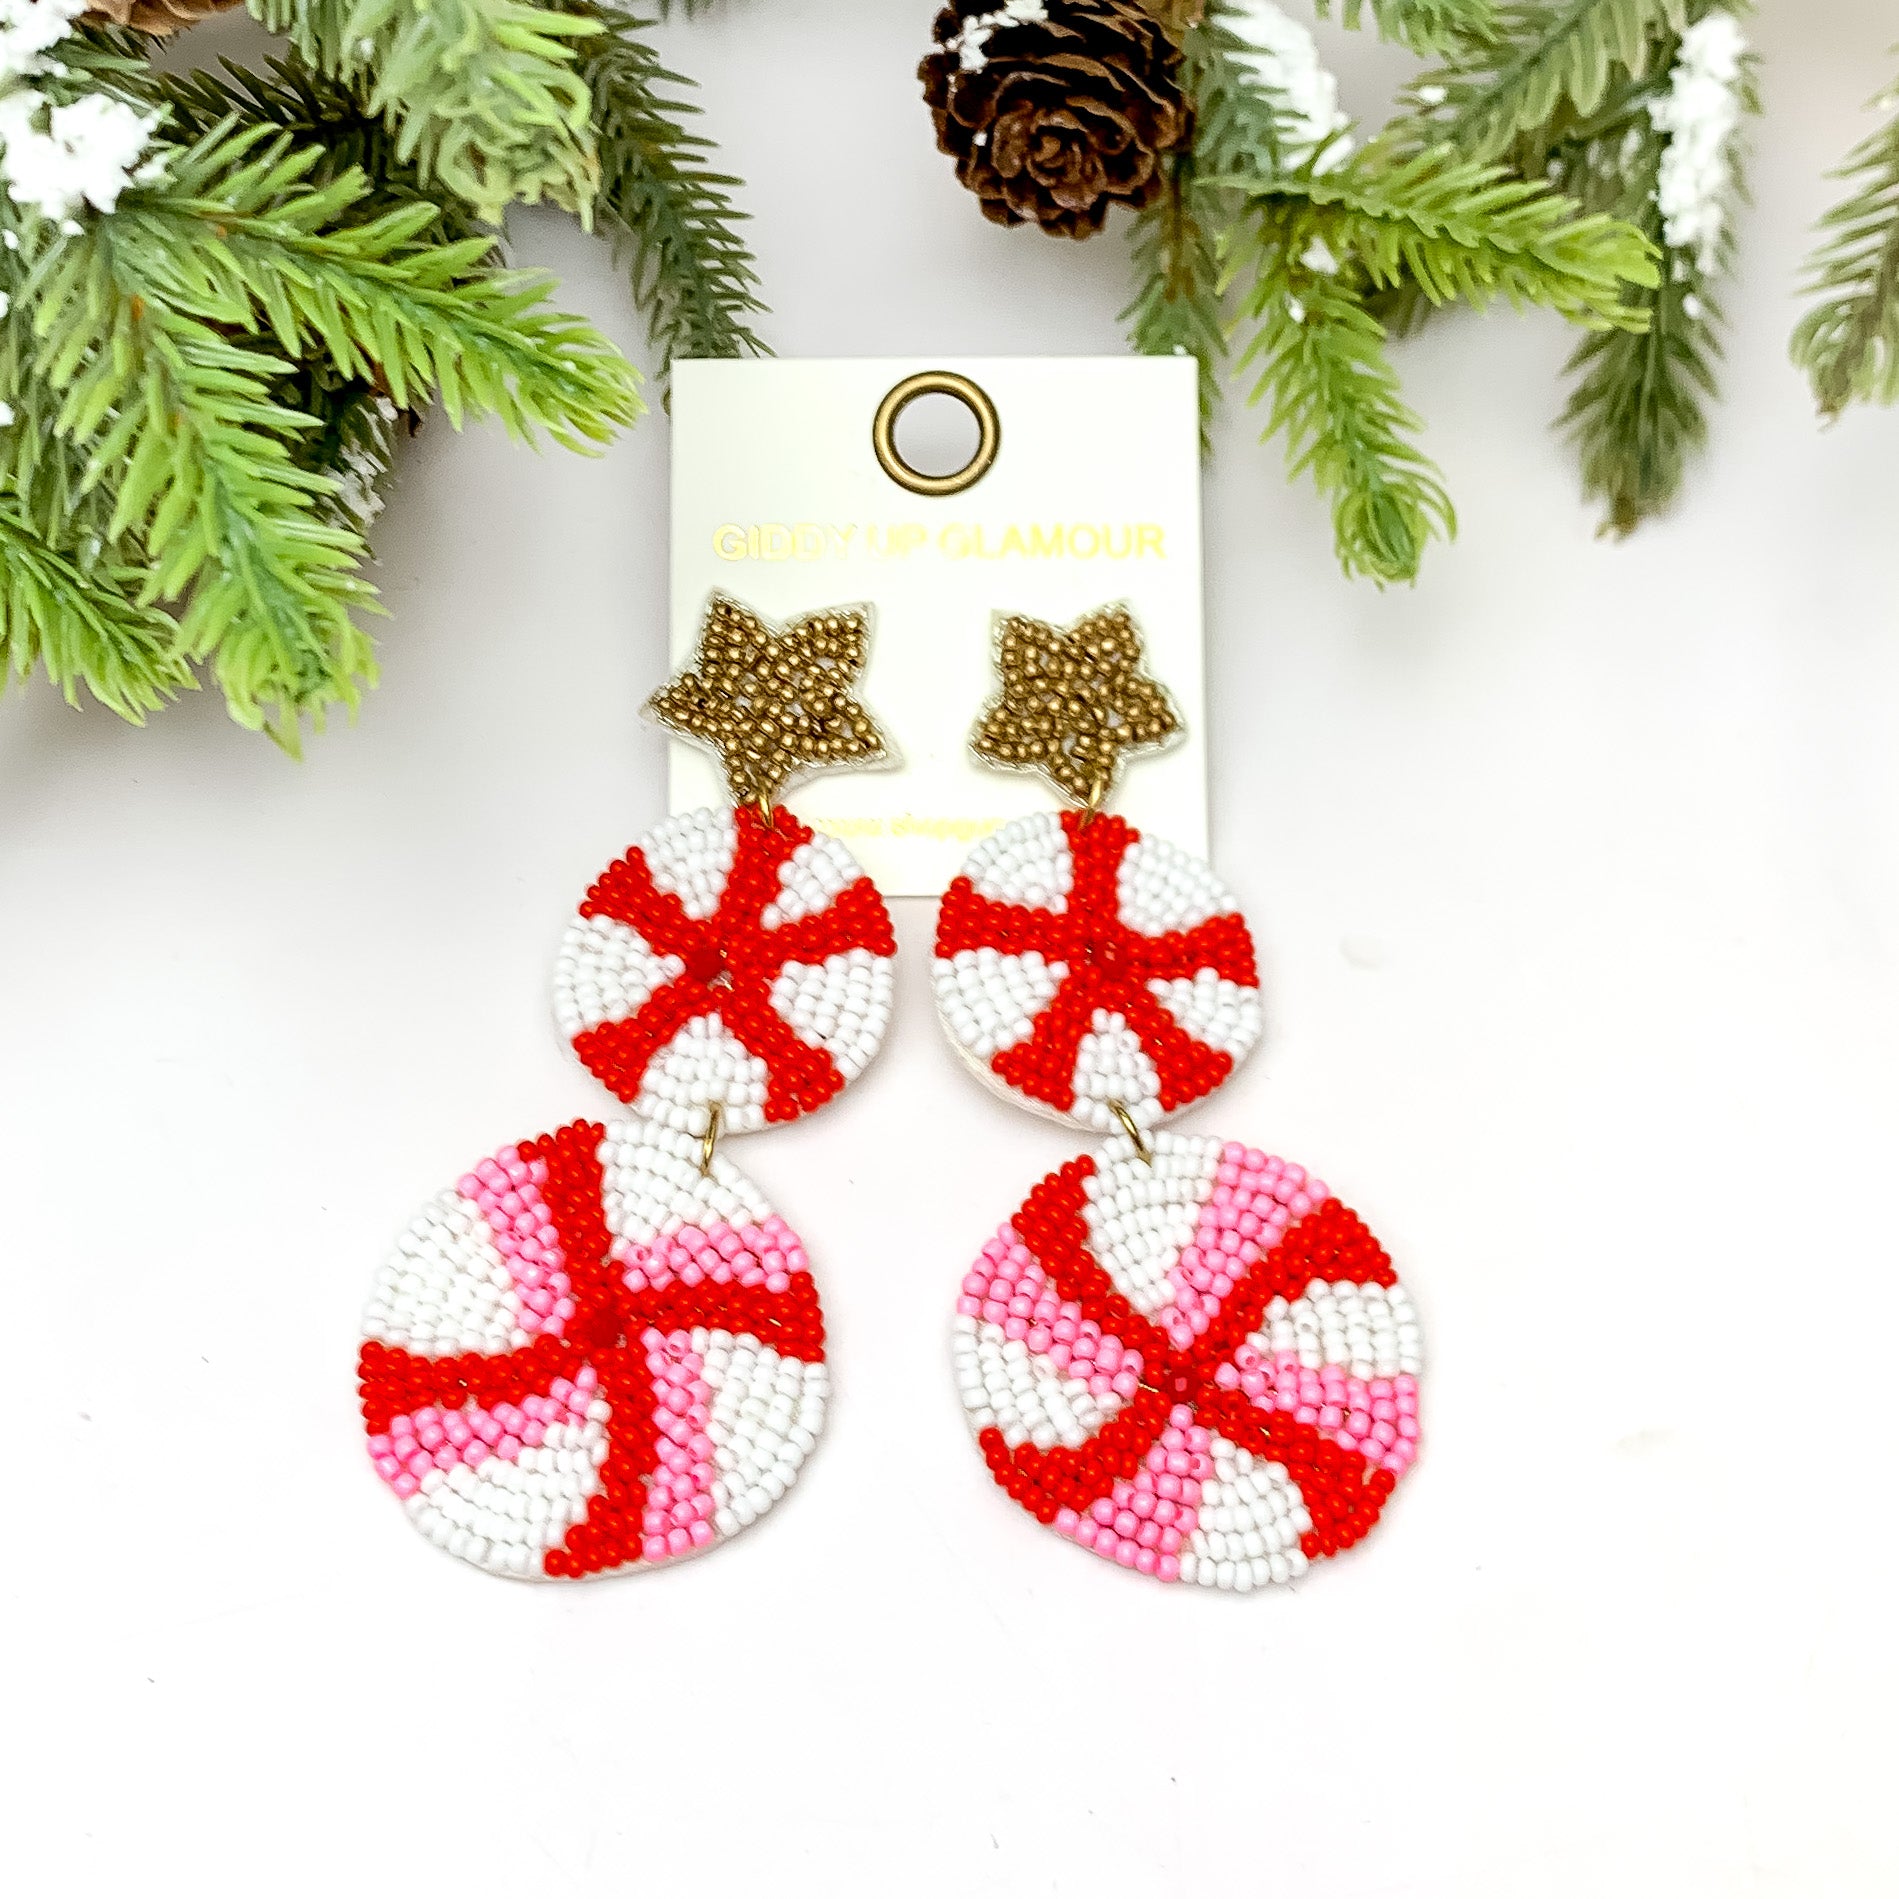 Christmas Colorful Dessert Lollipop Beaded Earrings. These earrings are pictured on a white background with a tree and pine cones at the top.